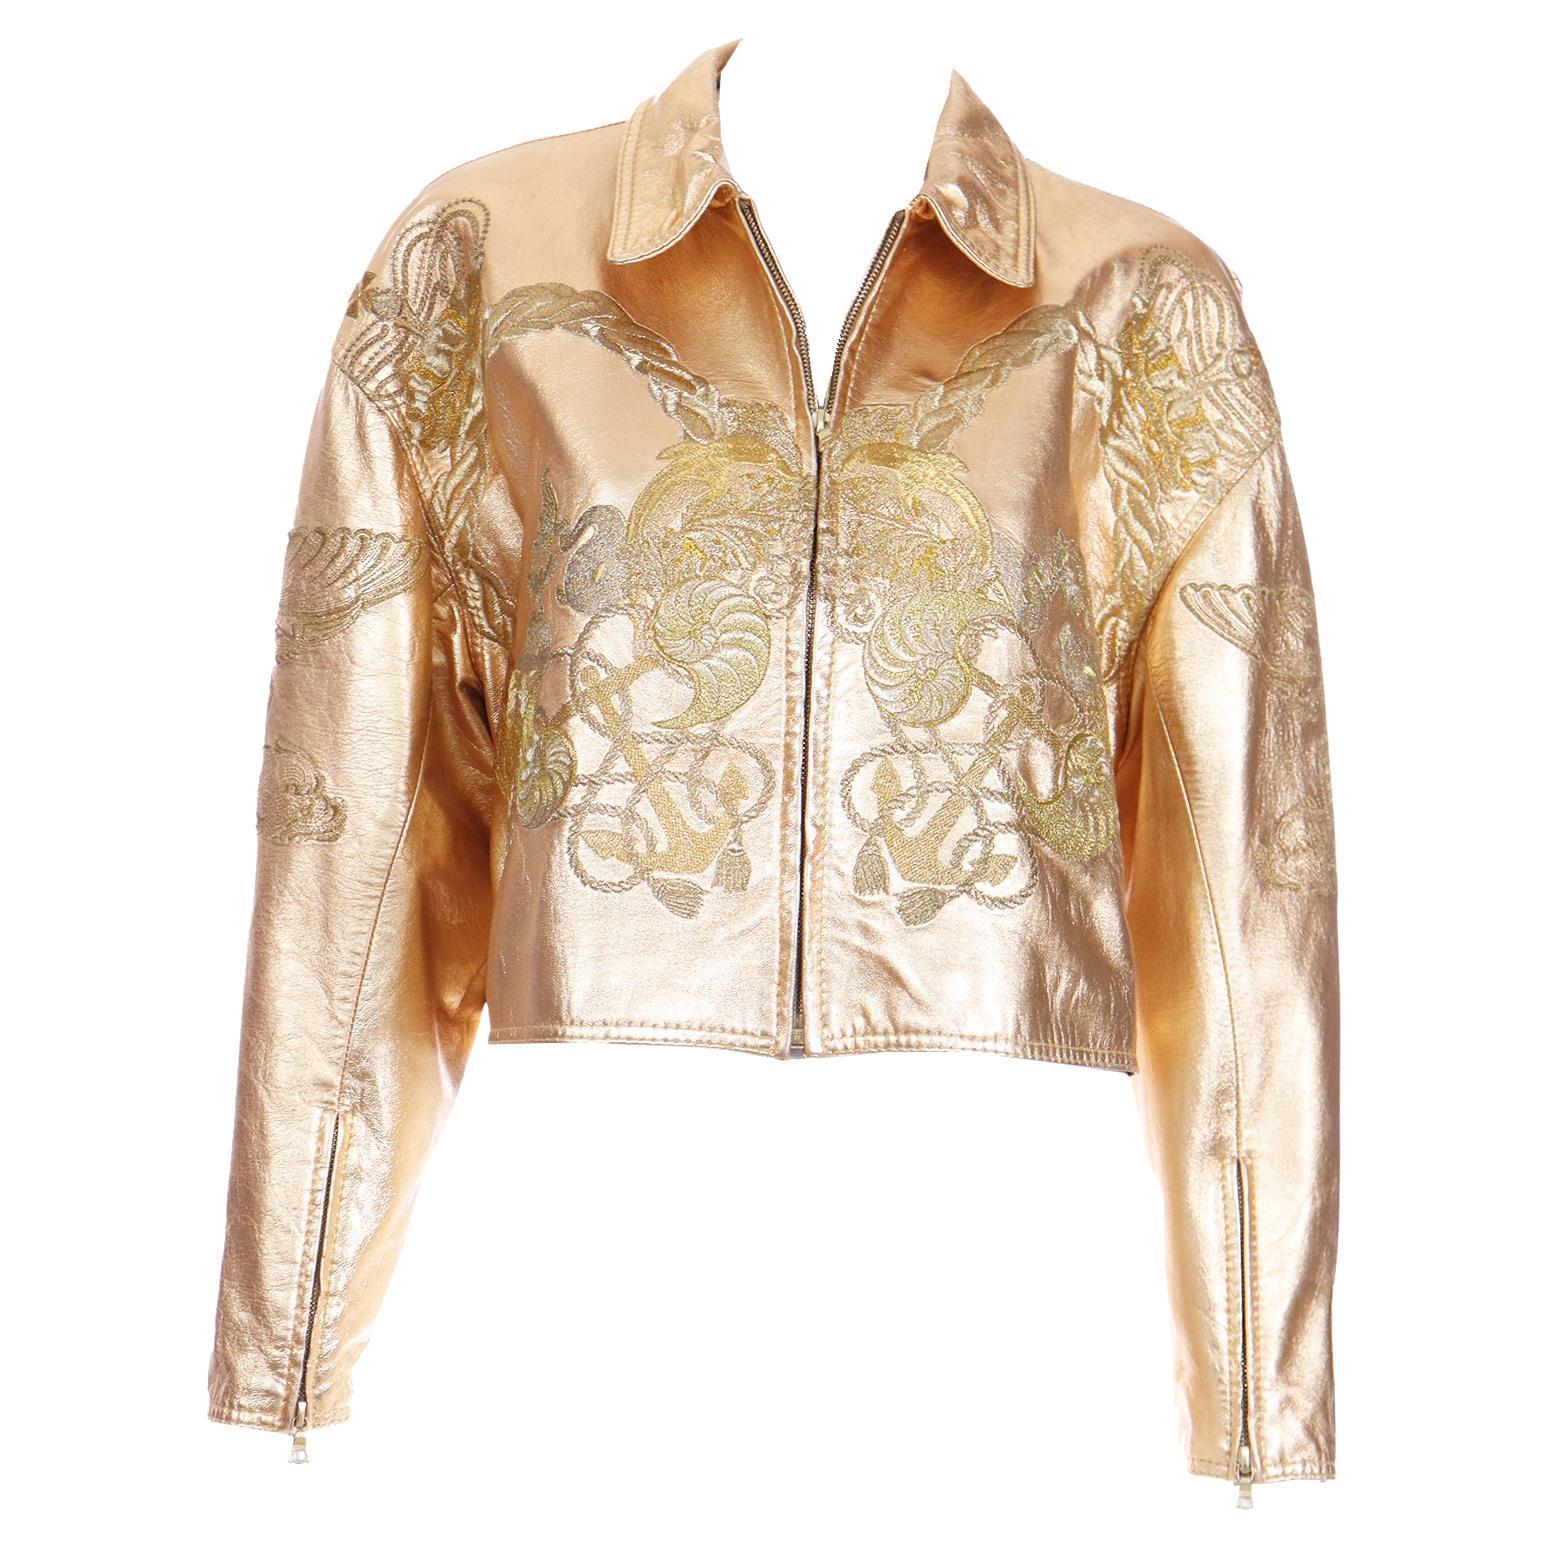 Gianfranco Ferre S/S 1992 Runway Gold Leather Embroidered Ocean Theme Jacket